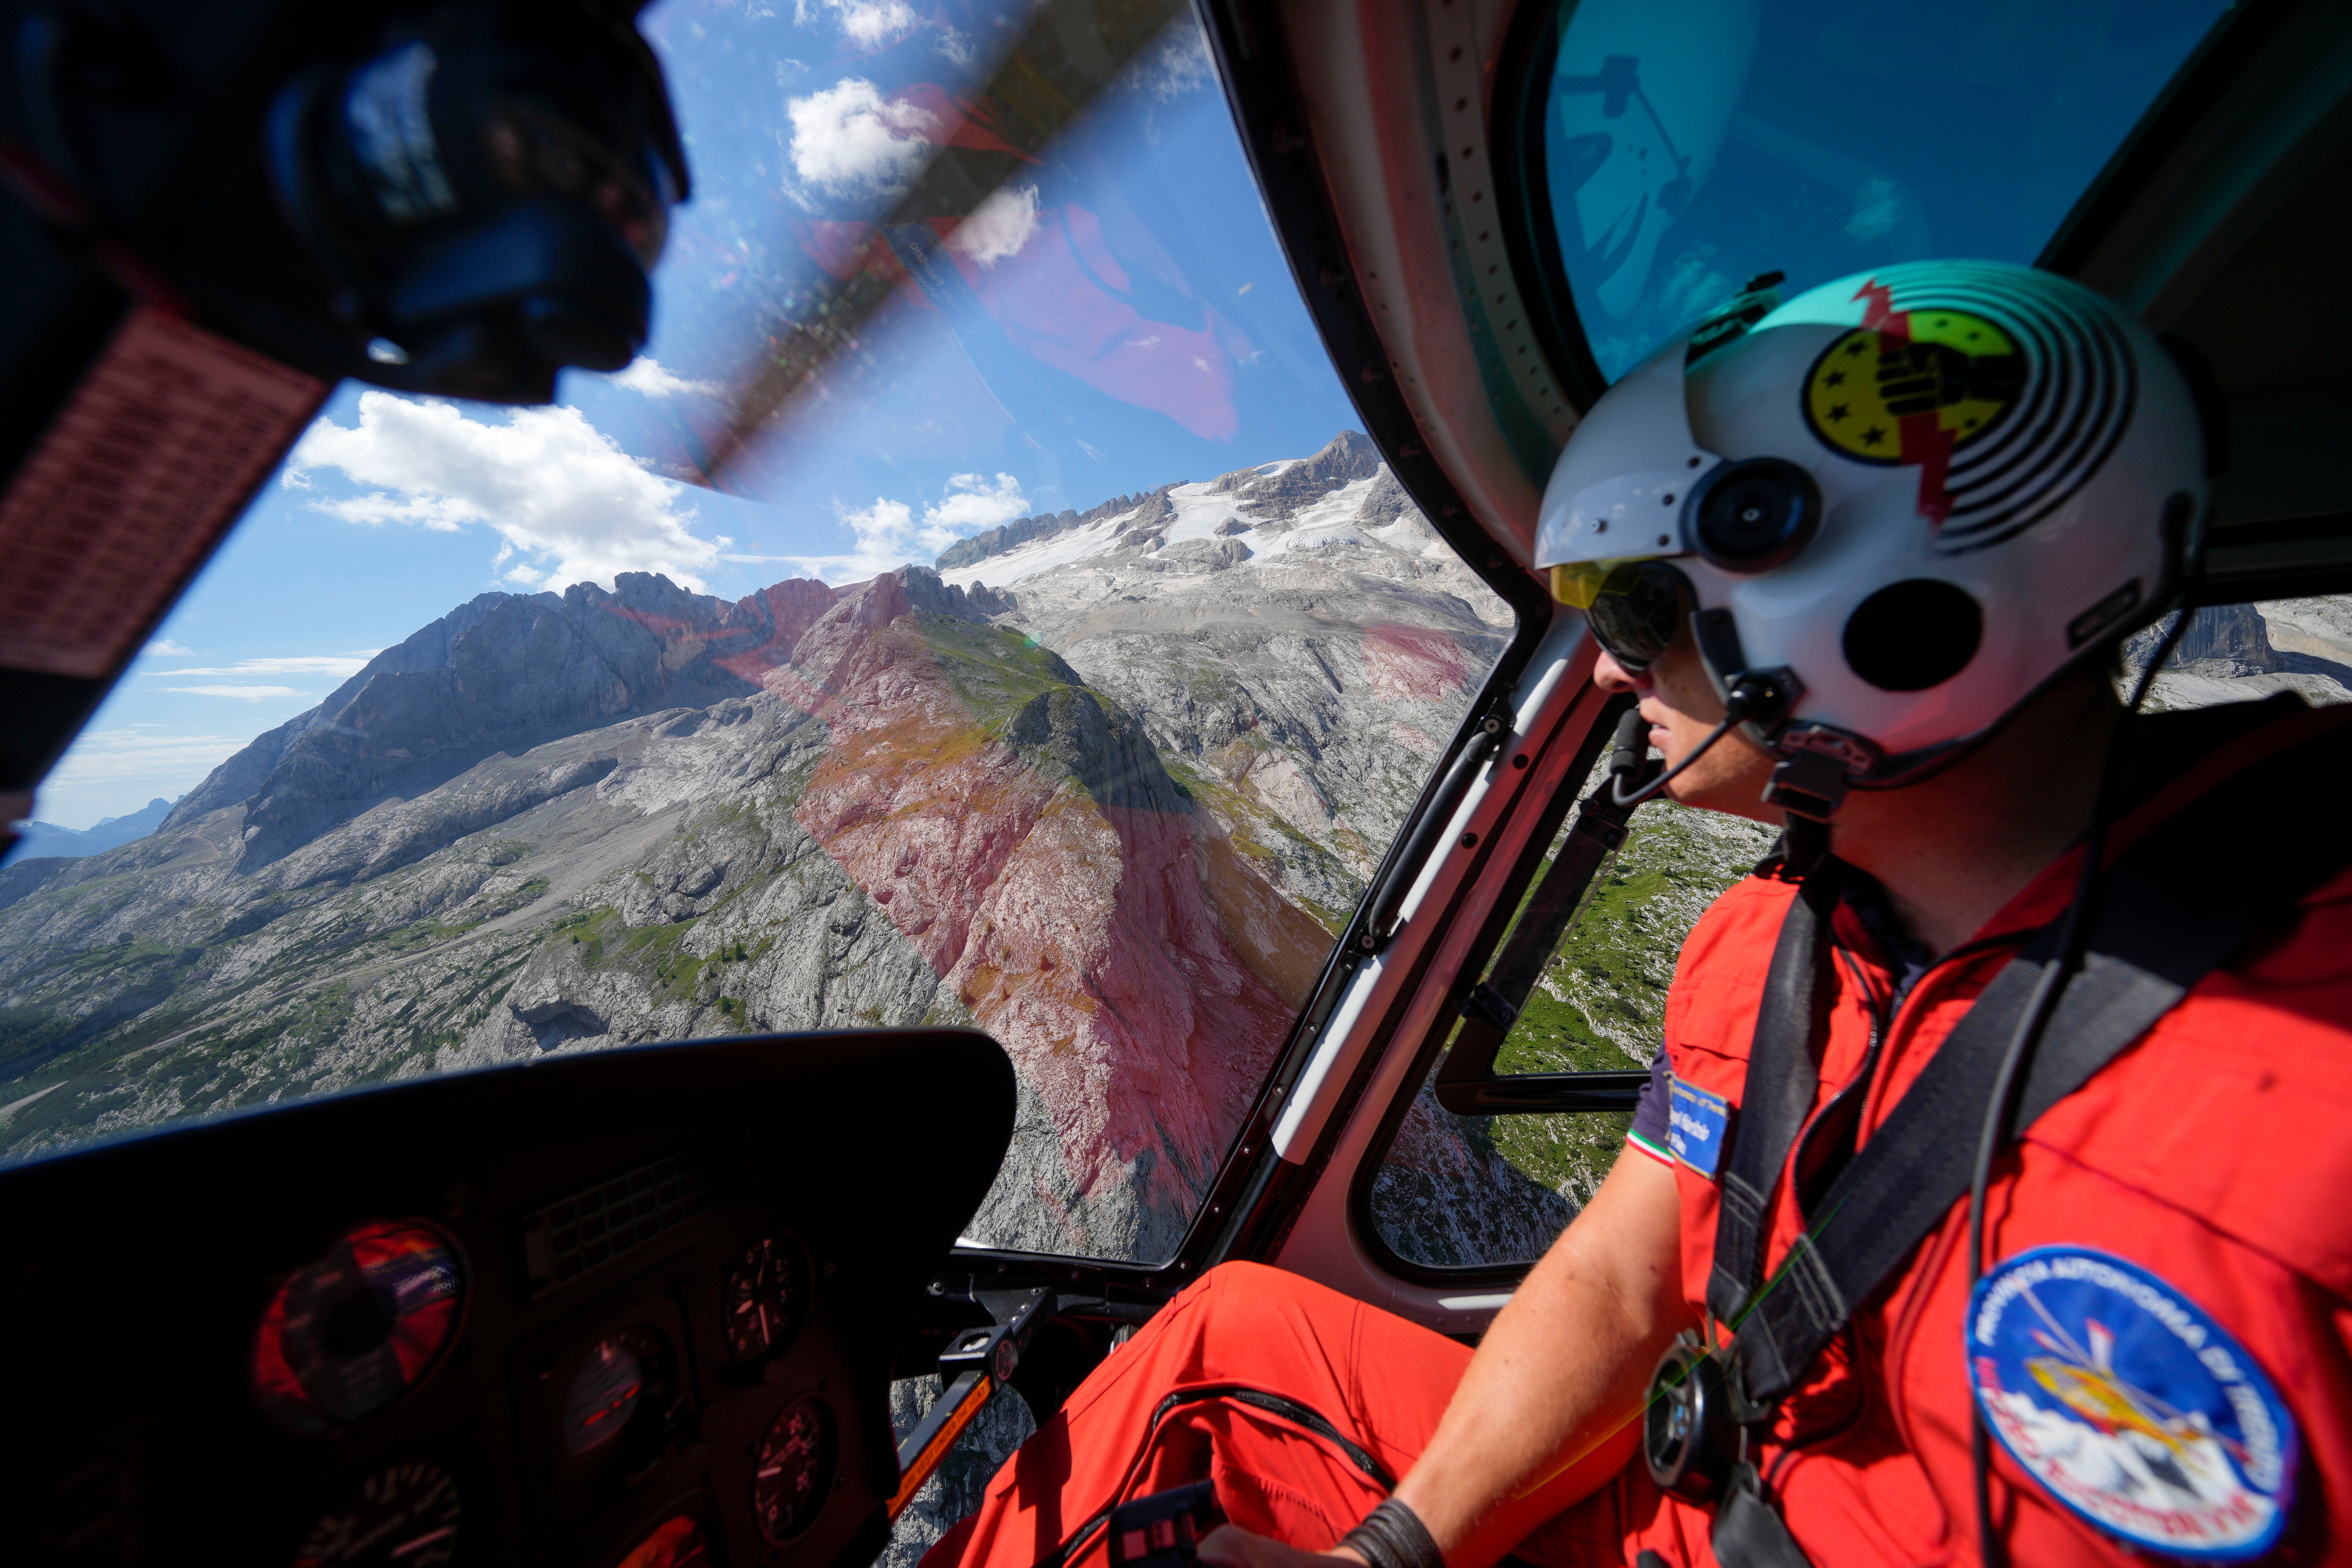 A rescuer pilots a helicopter to look for survivors. (Photo: Luca Bruno, AP)